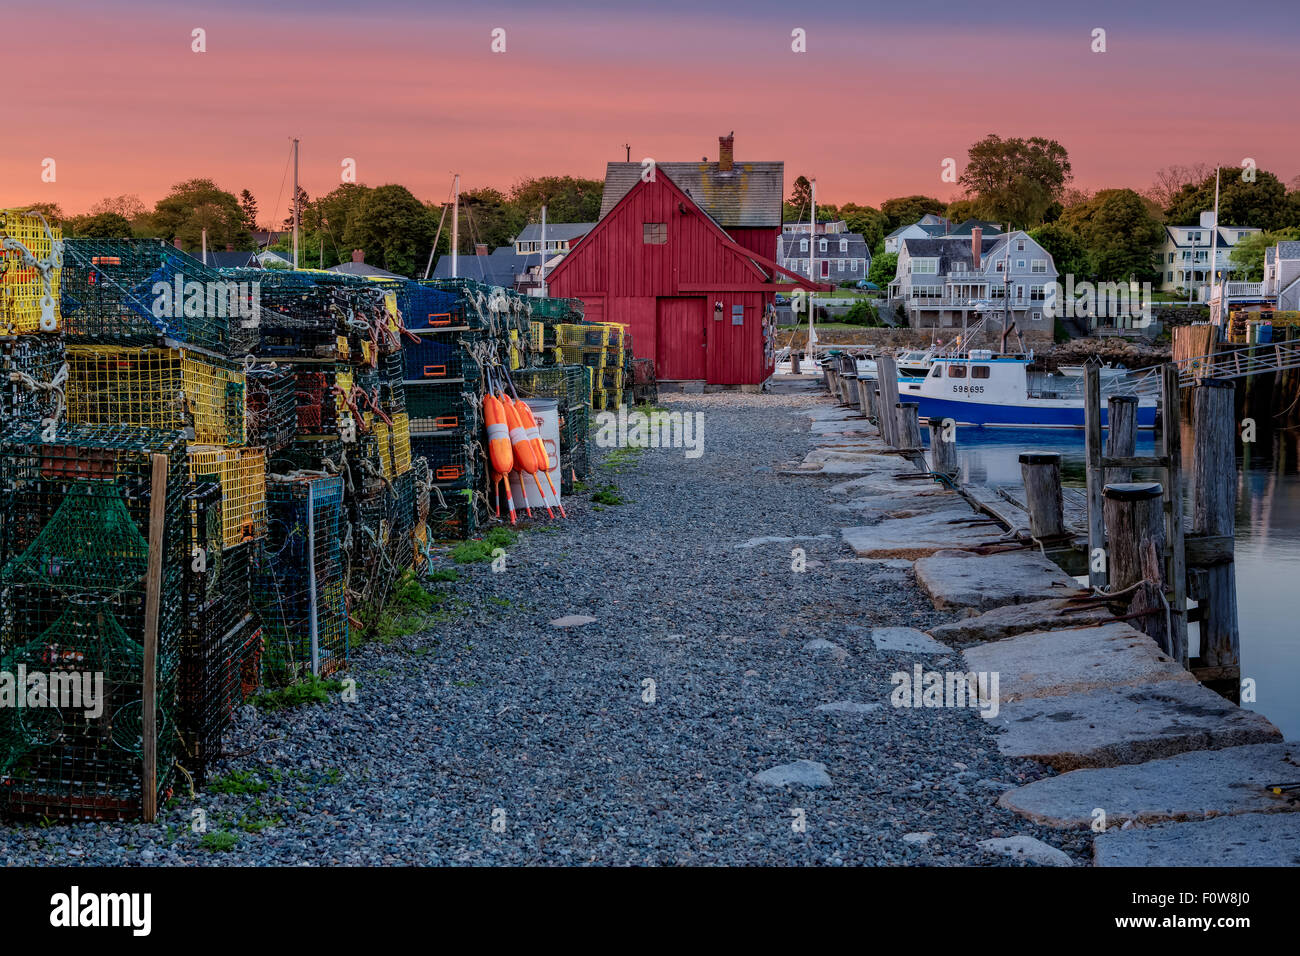 First Light At Motif Number One  - New England's iconic landmark of Bradley Wharf commonly known as Motif Number One during first light in Rockport, Massachusetts. Stock Photo